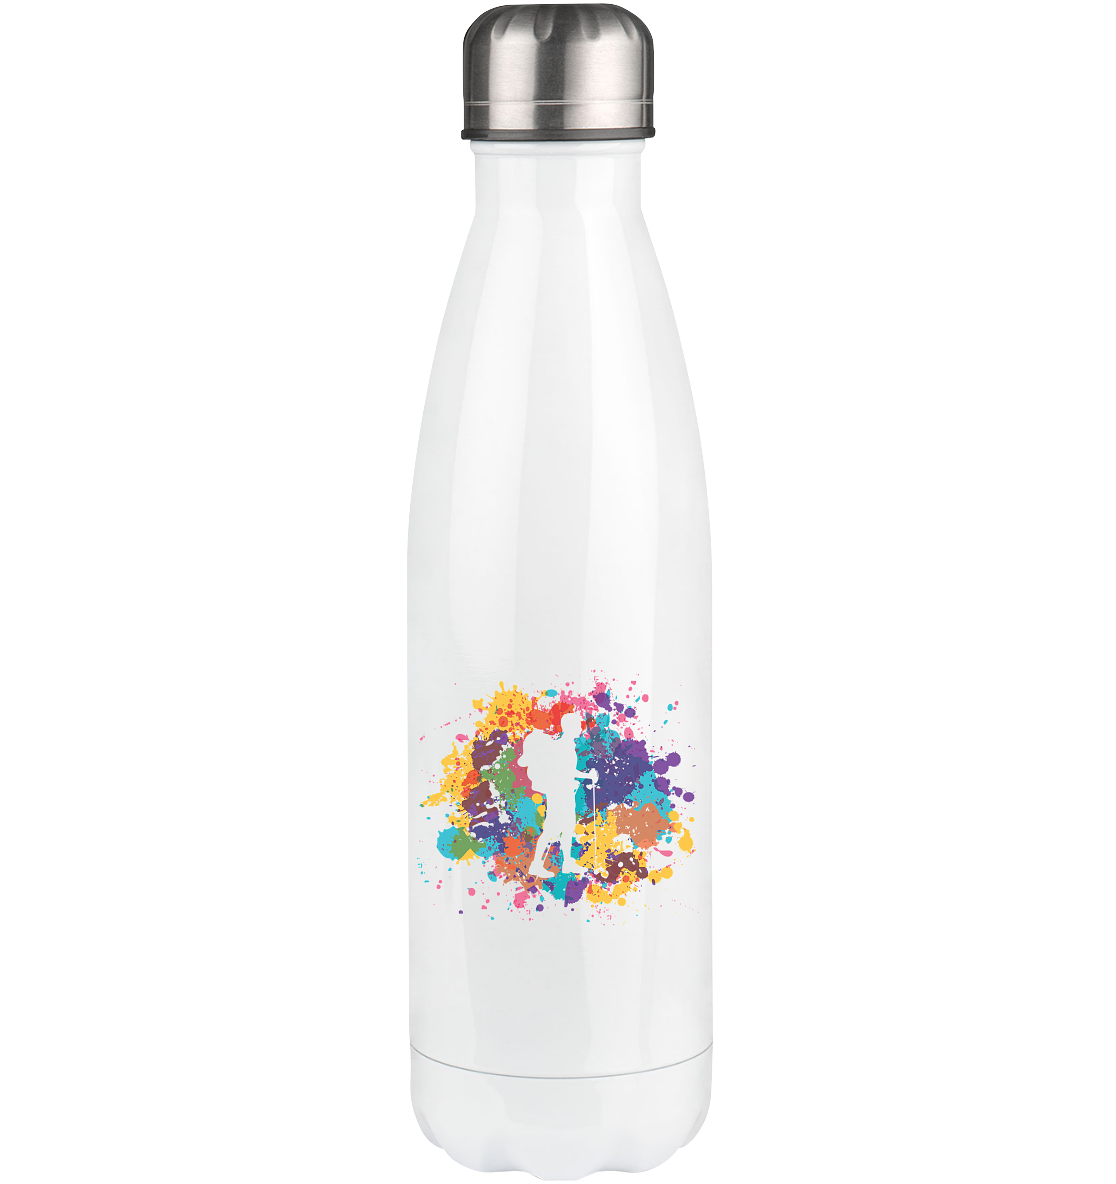 Colorful Splash and Hiking - Edelstahl Thermosflasche wandern 500ml